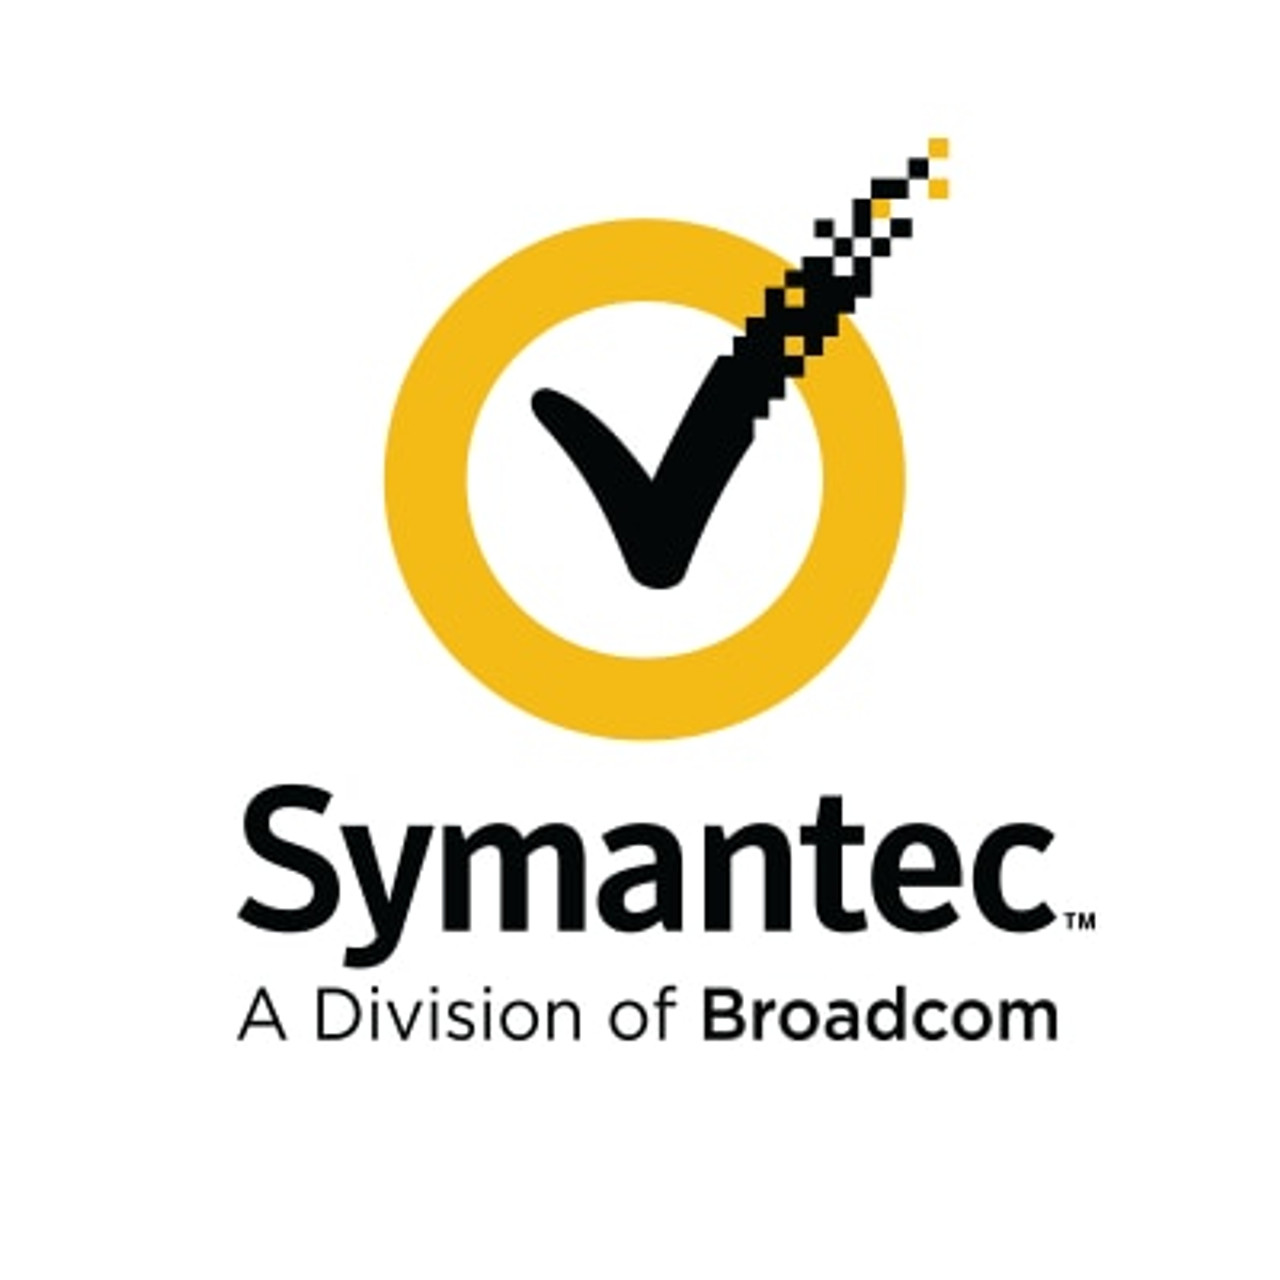 Symantec Complete Endpoint Defense (without SEP), Initial Hybrid Subscription License with Support, 250,000-499,999 Devices 3 YR